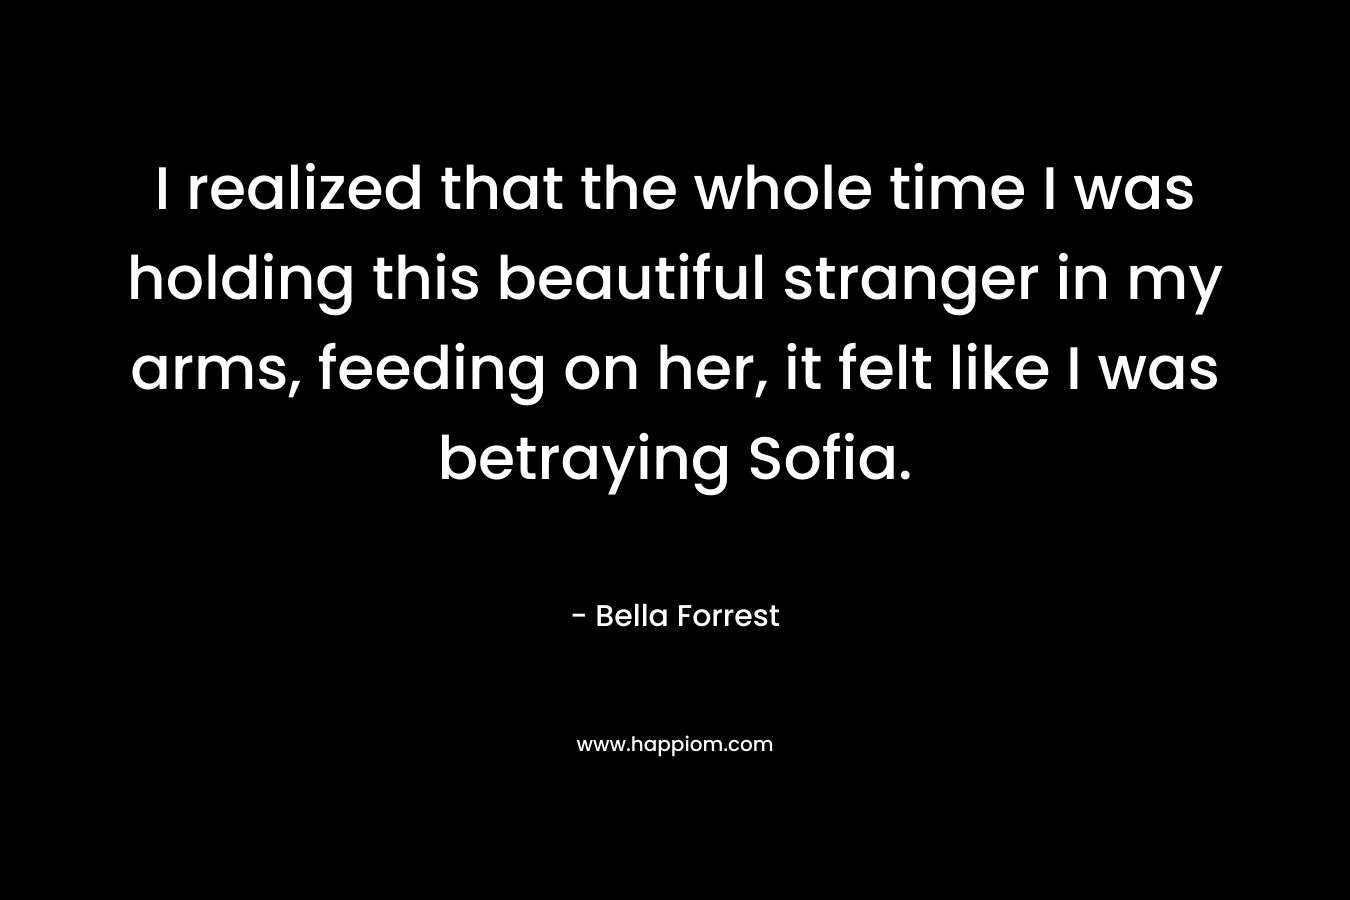 I realized that the whole time I was holding this beautiful stranger in my arms, feeding on her, it felt like I was betraying Sofia. – Bella Forrest